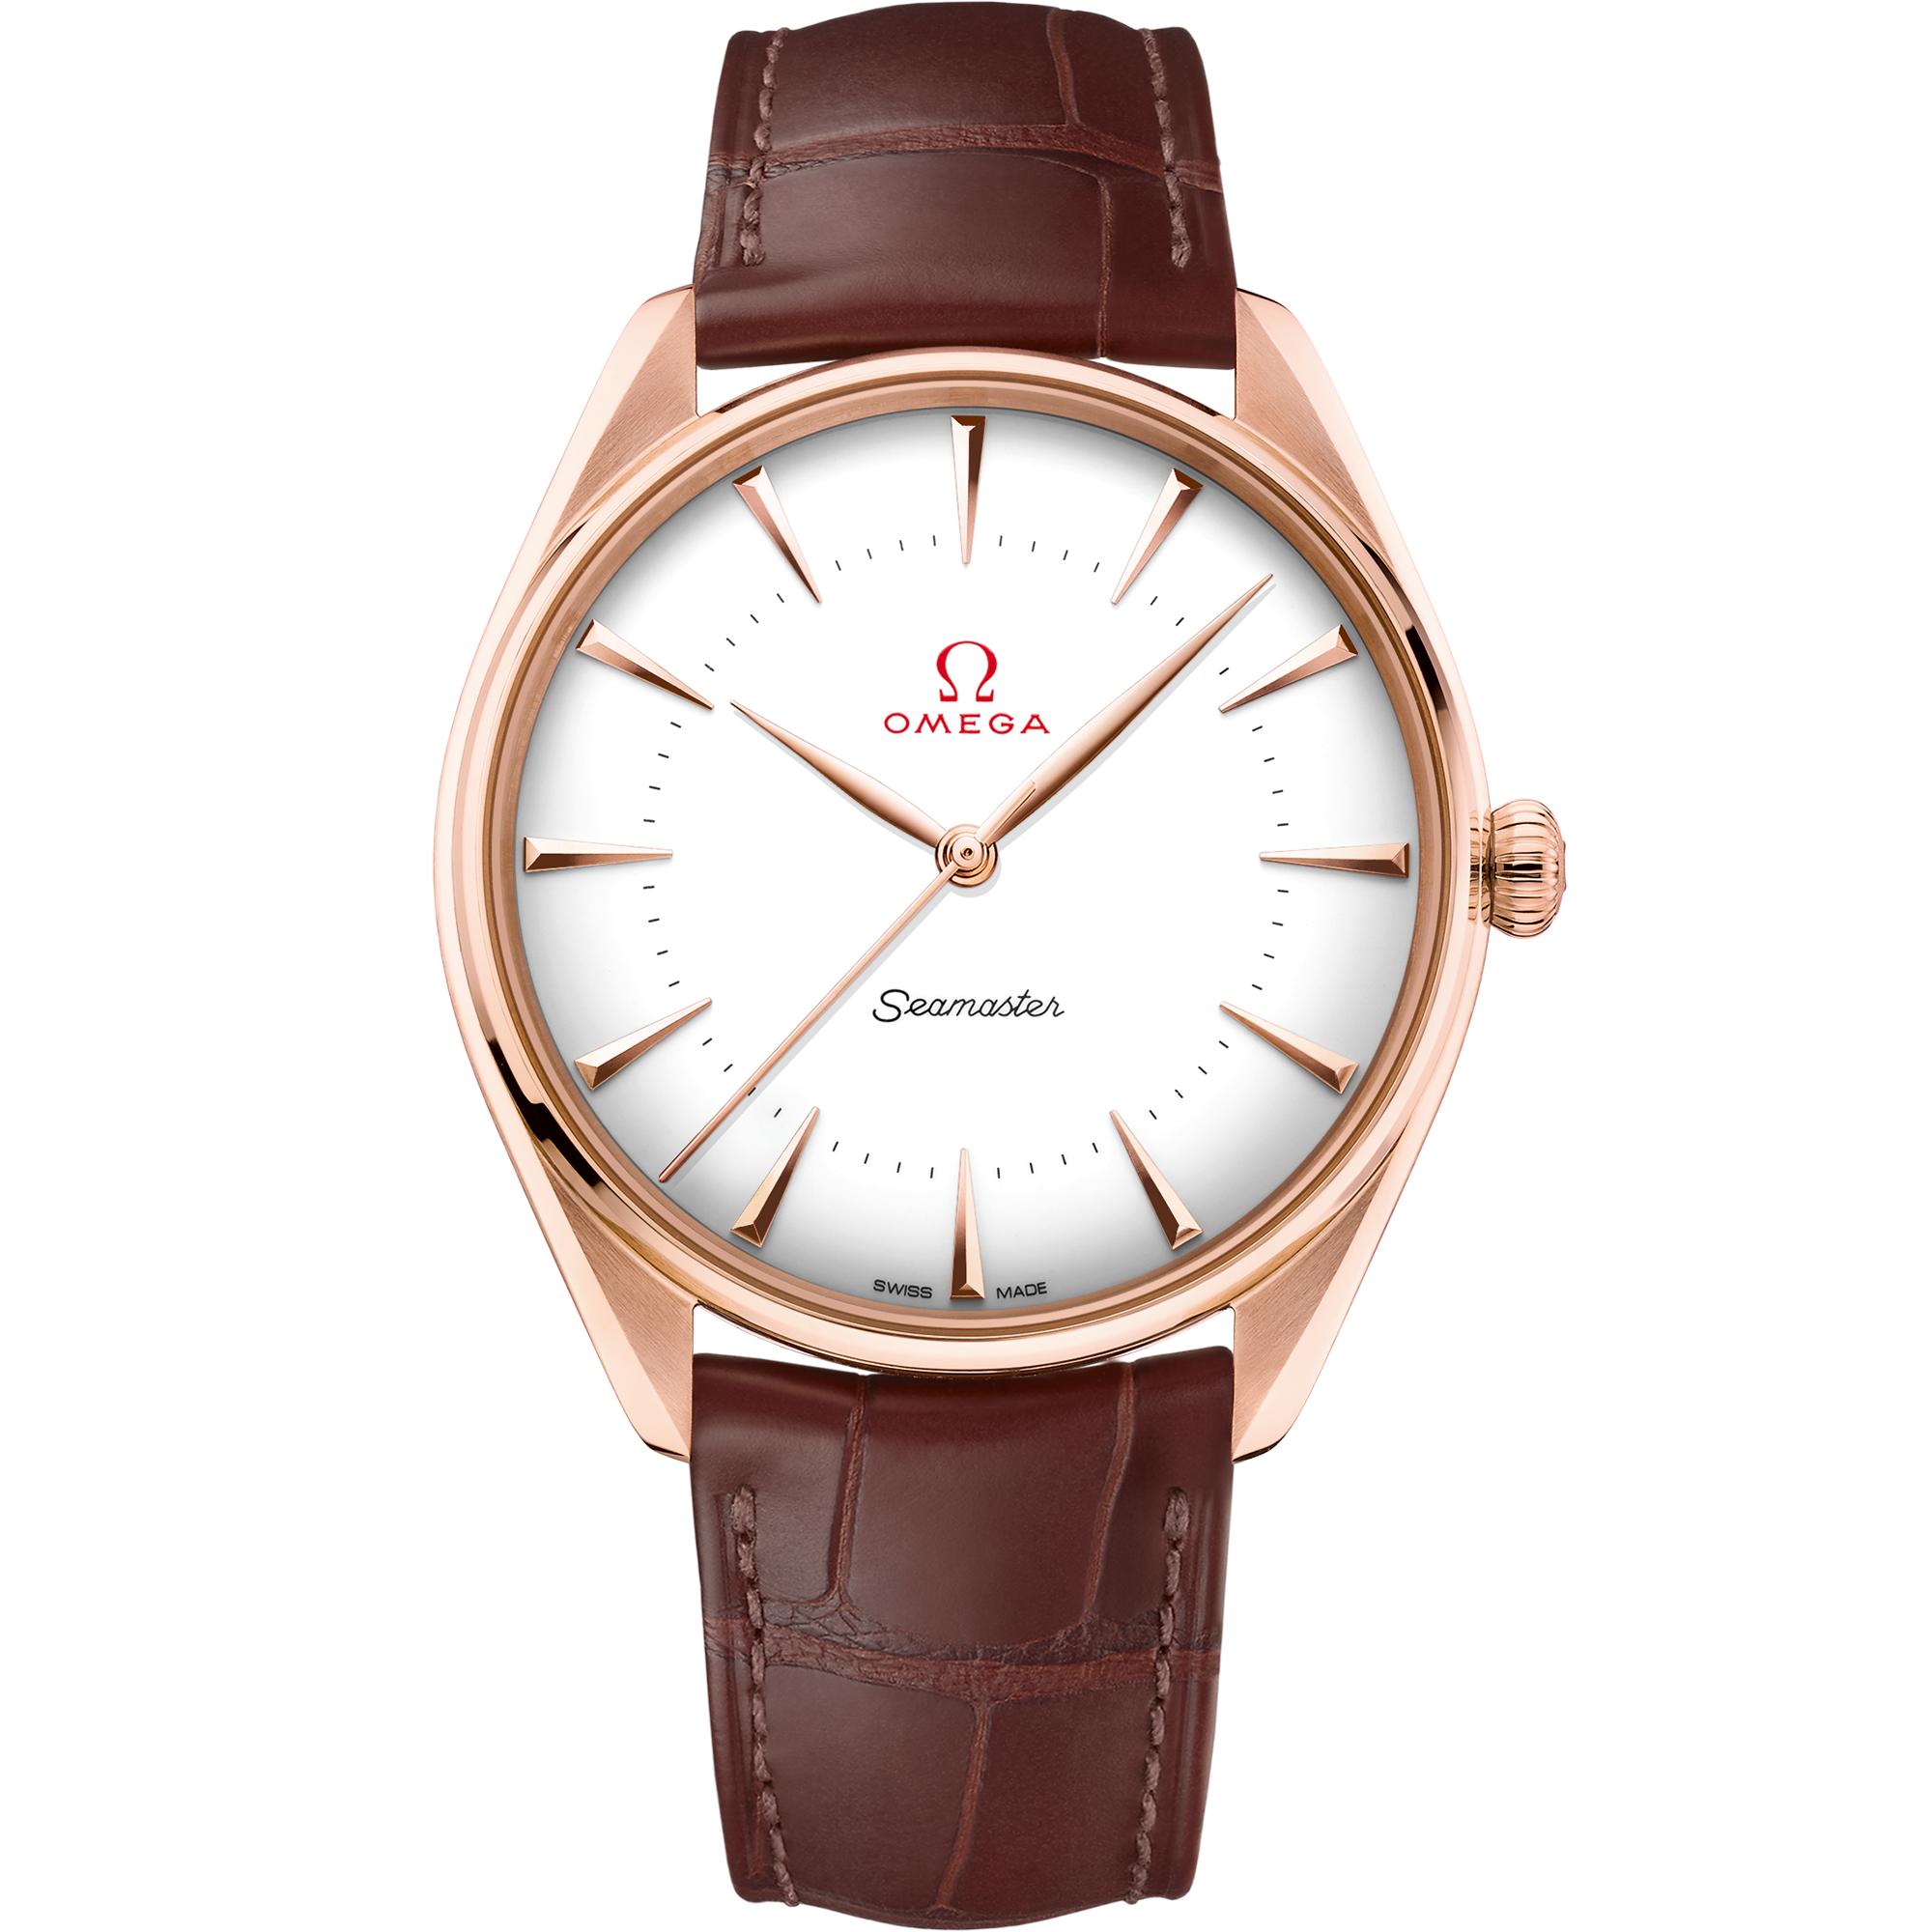 Seamaster 39.5 mm, Sedna™ gold on leather strap - 522.53.40.20.04.003